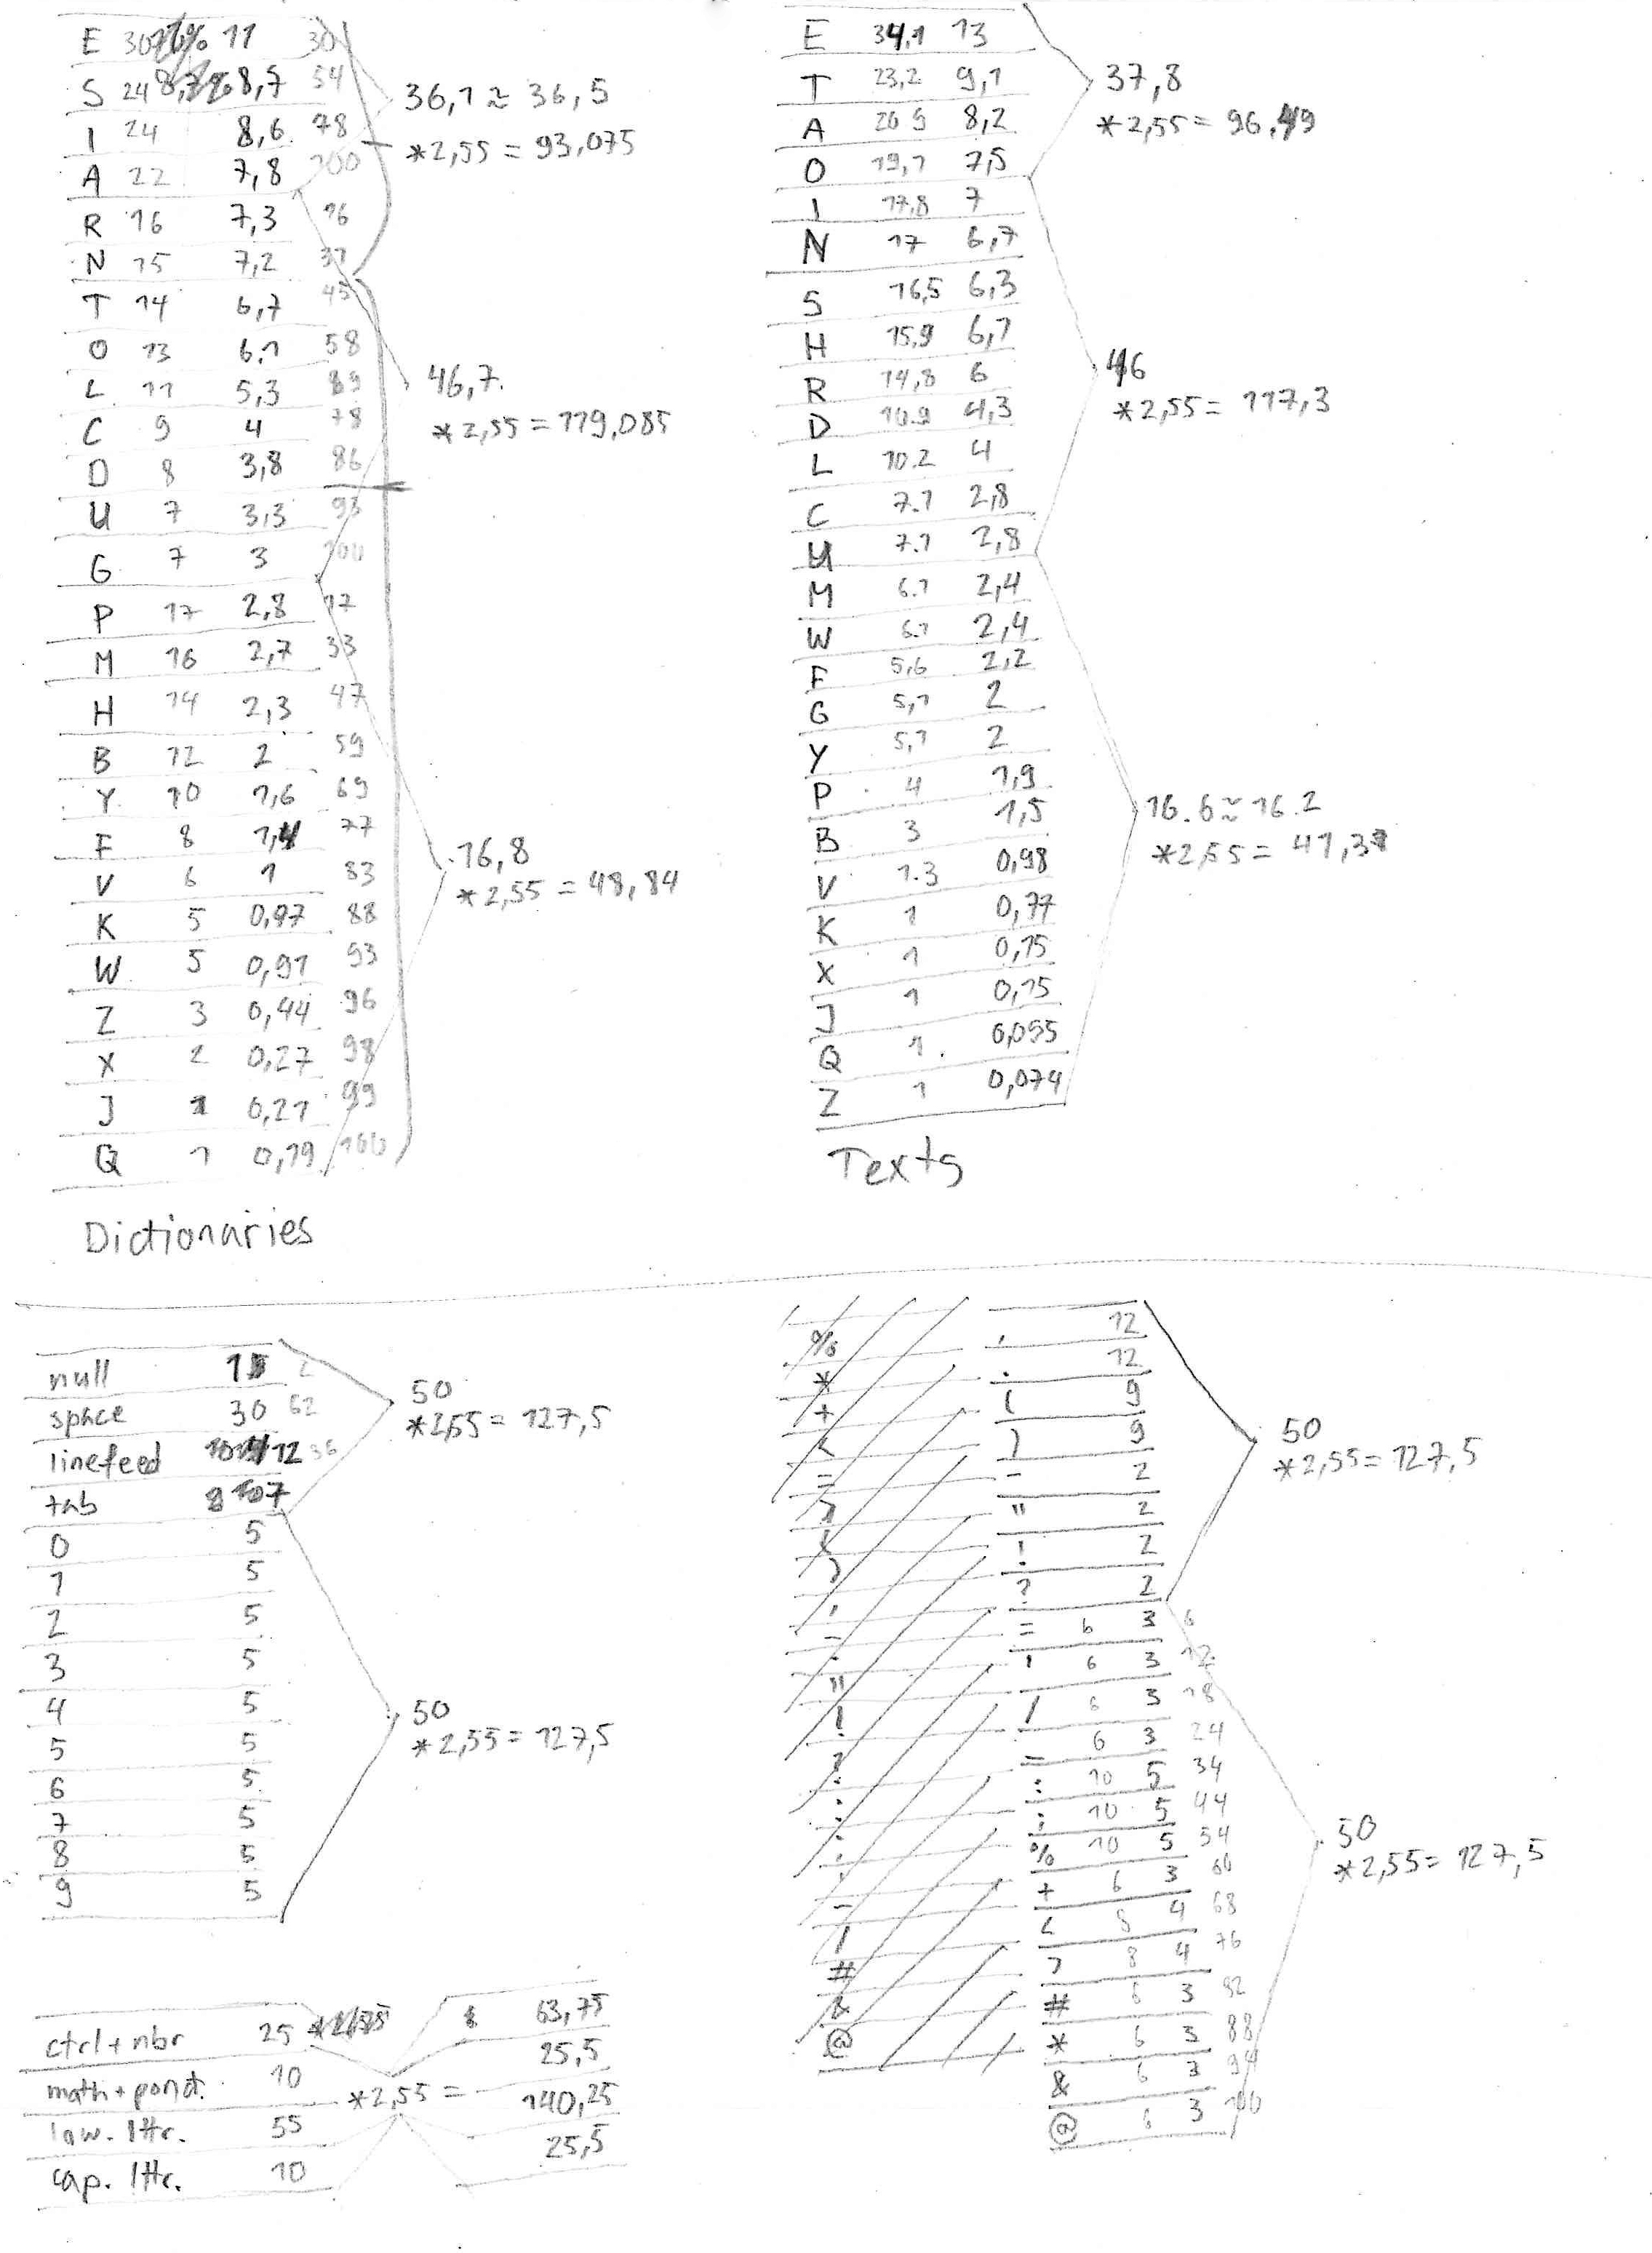 Scan of the custom ASCII chart wiht letter frequency